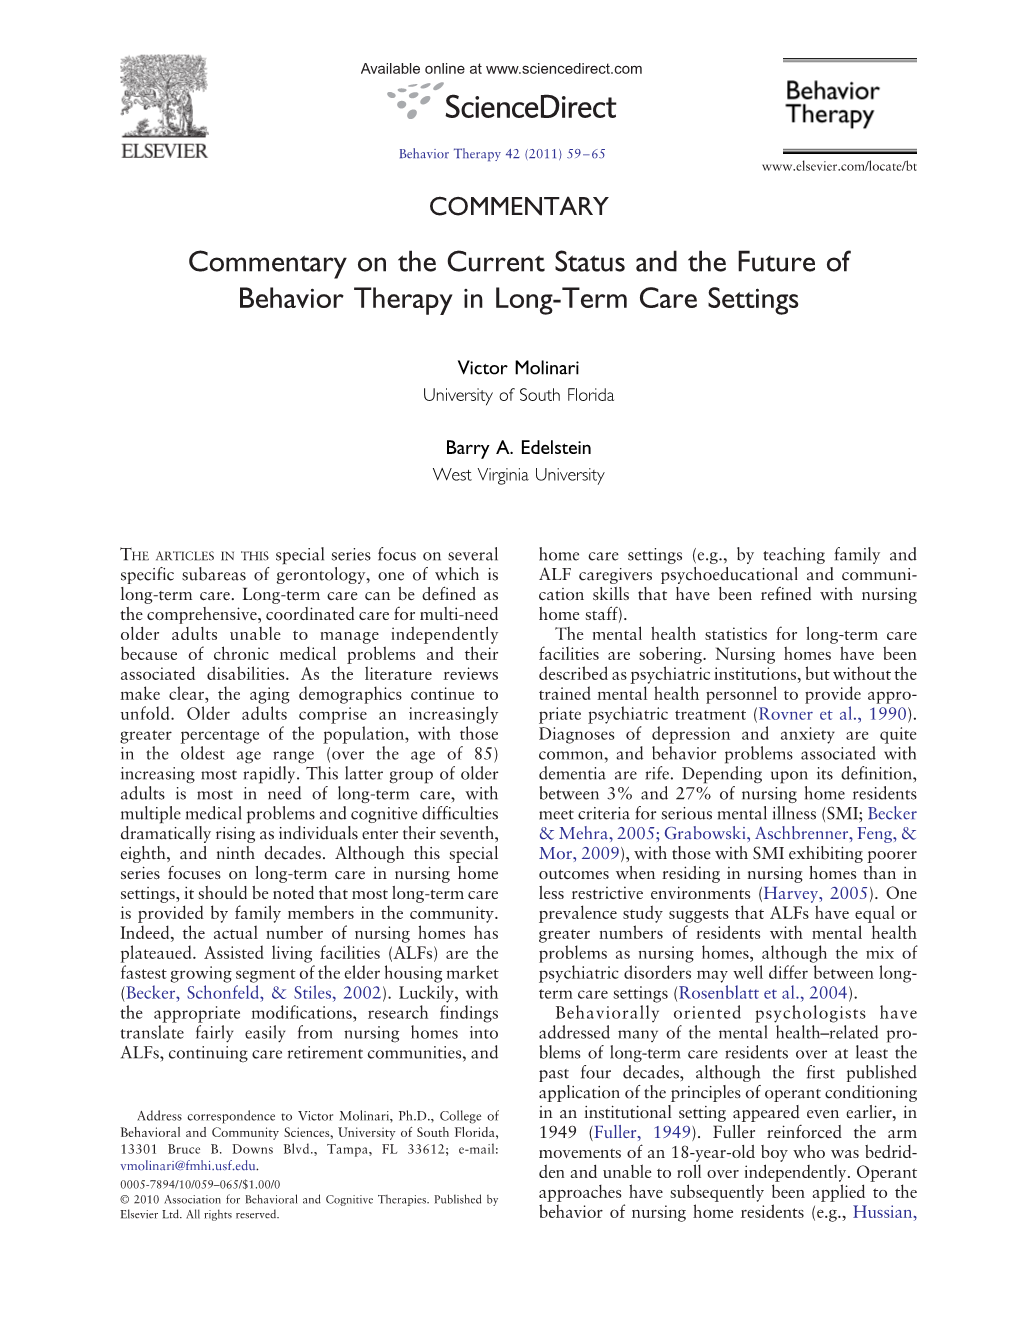 Commentary on the Current Status and the Future of Behavior Therapy in Long-Term Care Settings